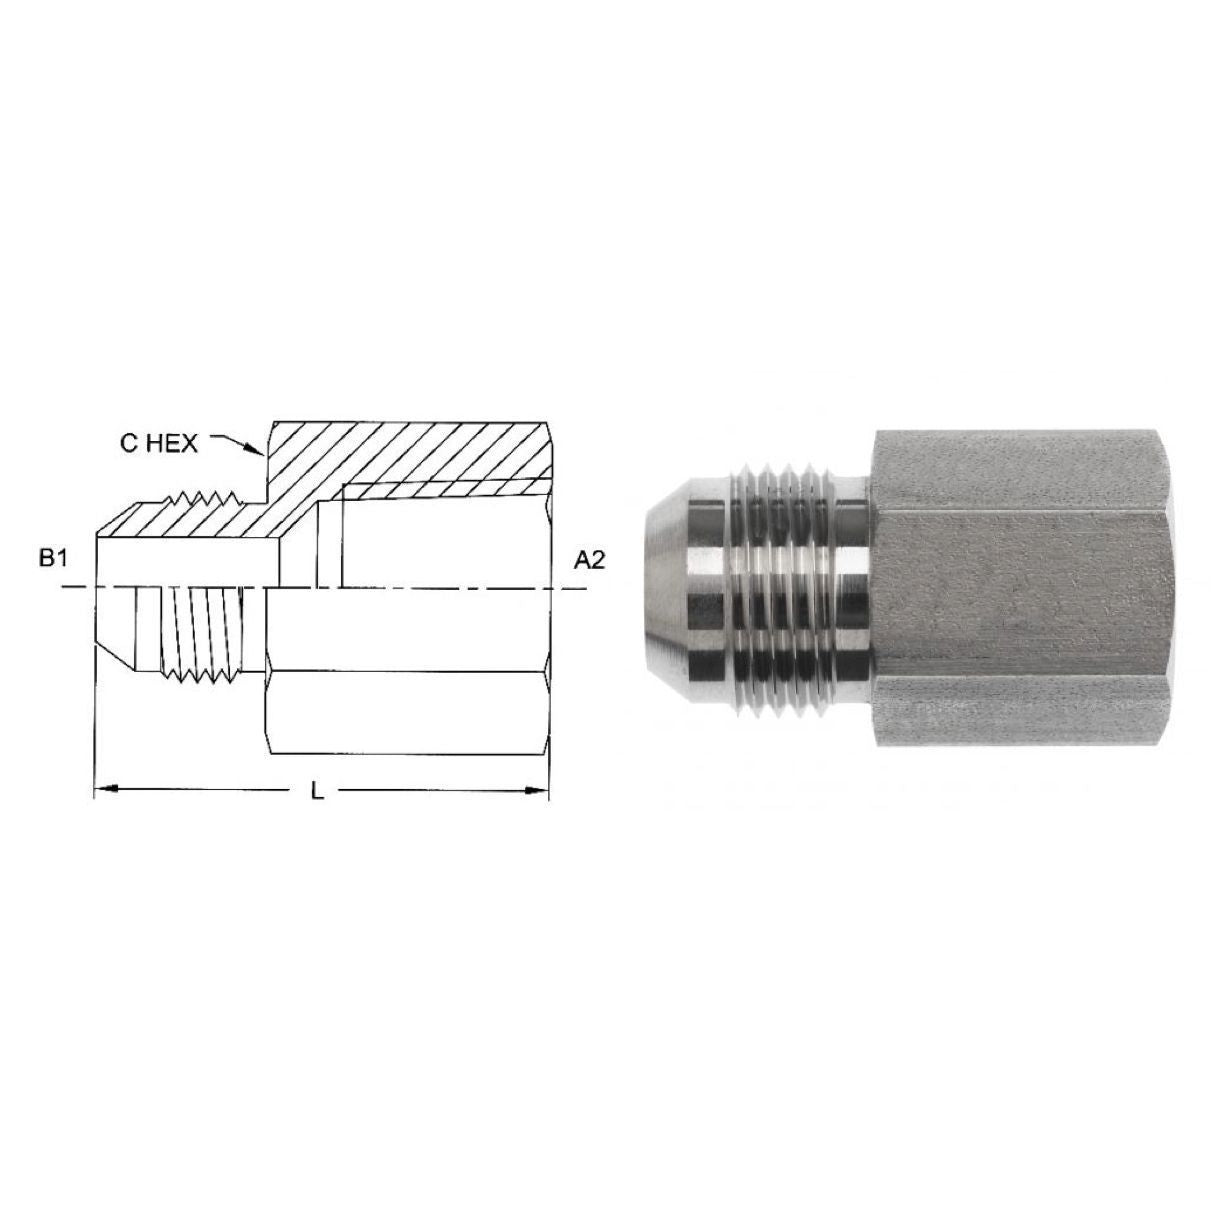 2405-24-20 : OneHydraulics  Adapter, Straight, 1.5 (1-1/2") Male NPT x 1.25 (1-1/4") Female, Steel, 2500psi